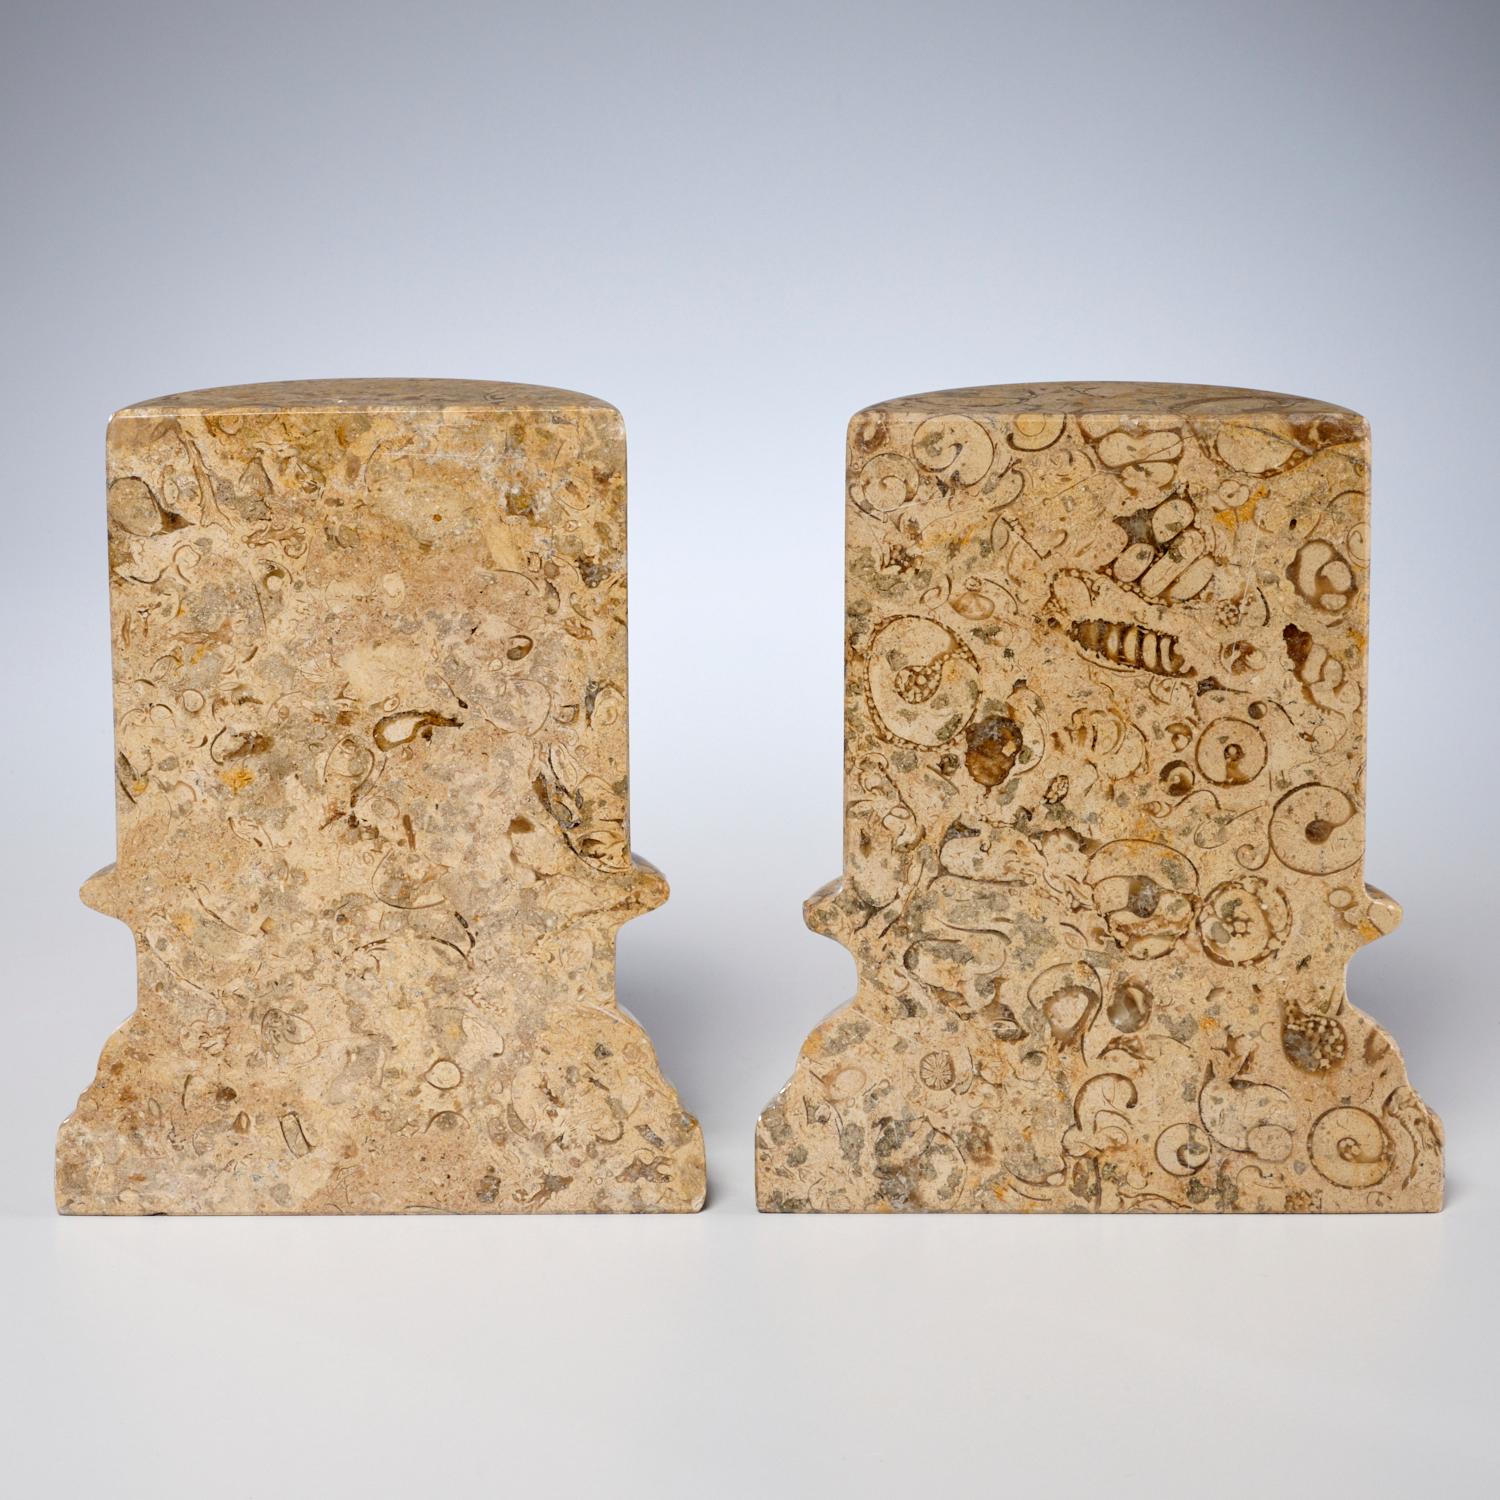 20th c., a high quality pair of demilune columnar form stone bookends, unmarked. Skillfully carved beige limestone with a large number of spiral shell gastropods, nautiloids, and other fossils polished to show off the beauty of the fossils. There